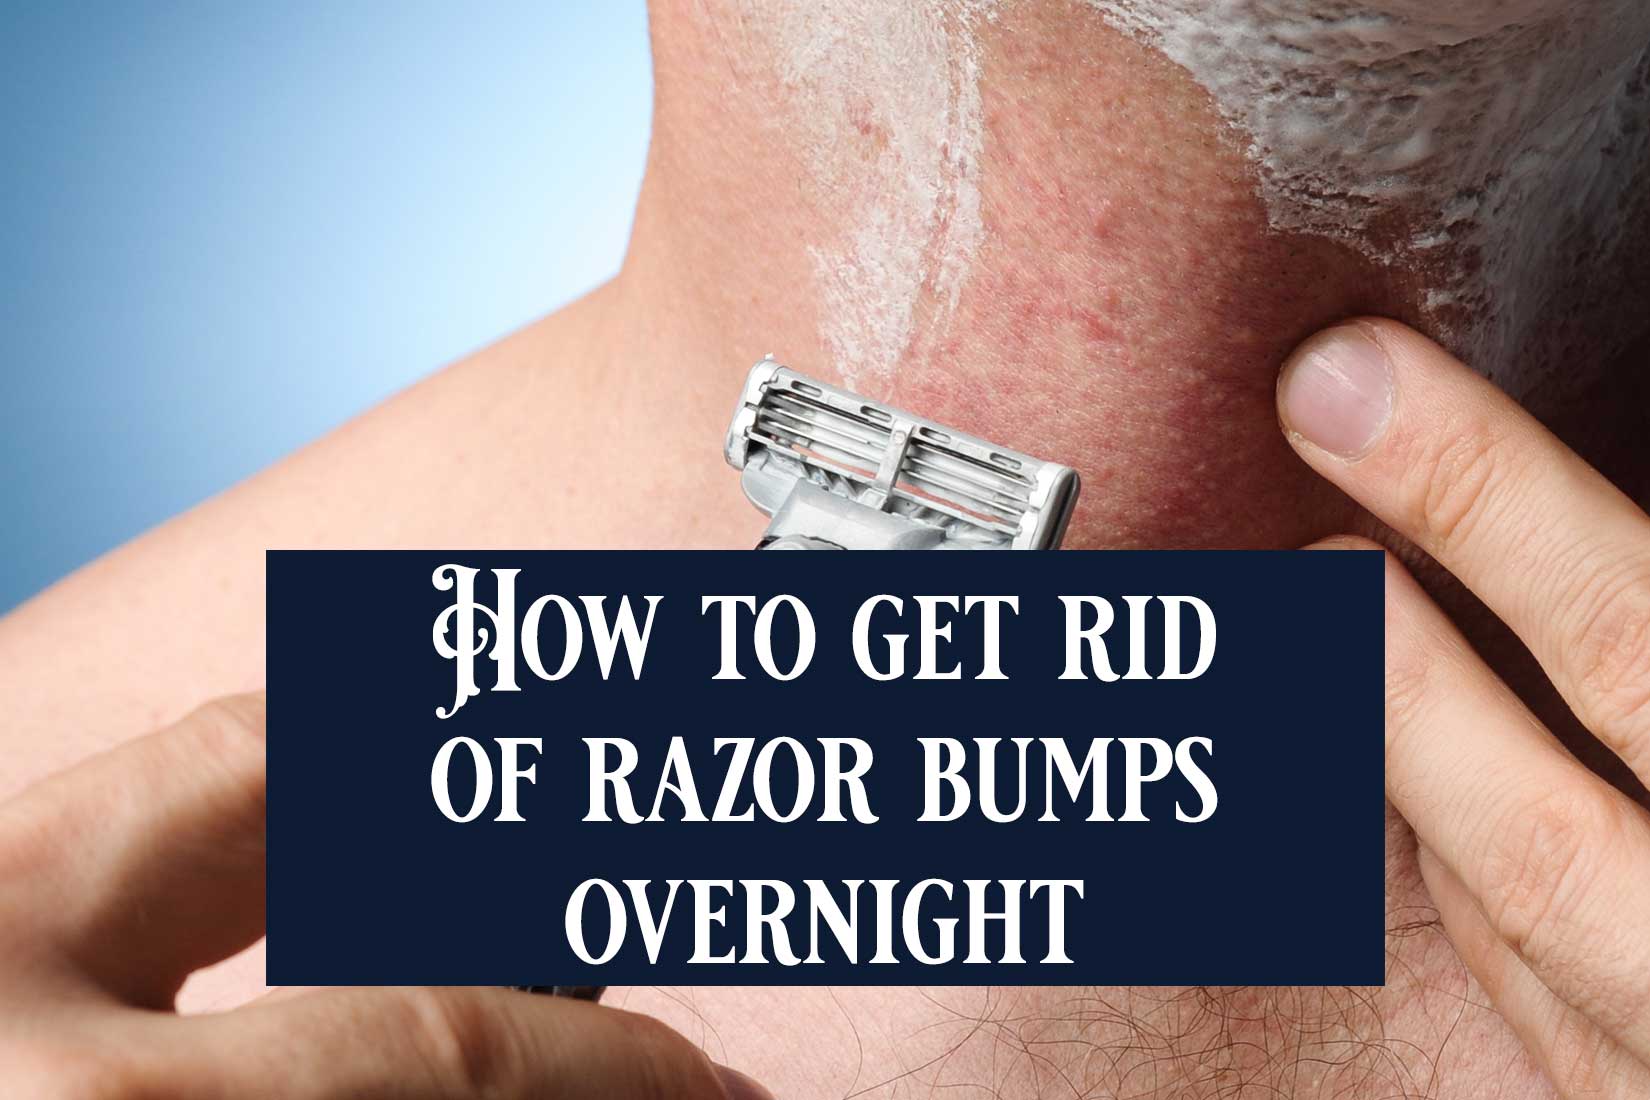 How To Get Rid Of Razor Bumps